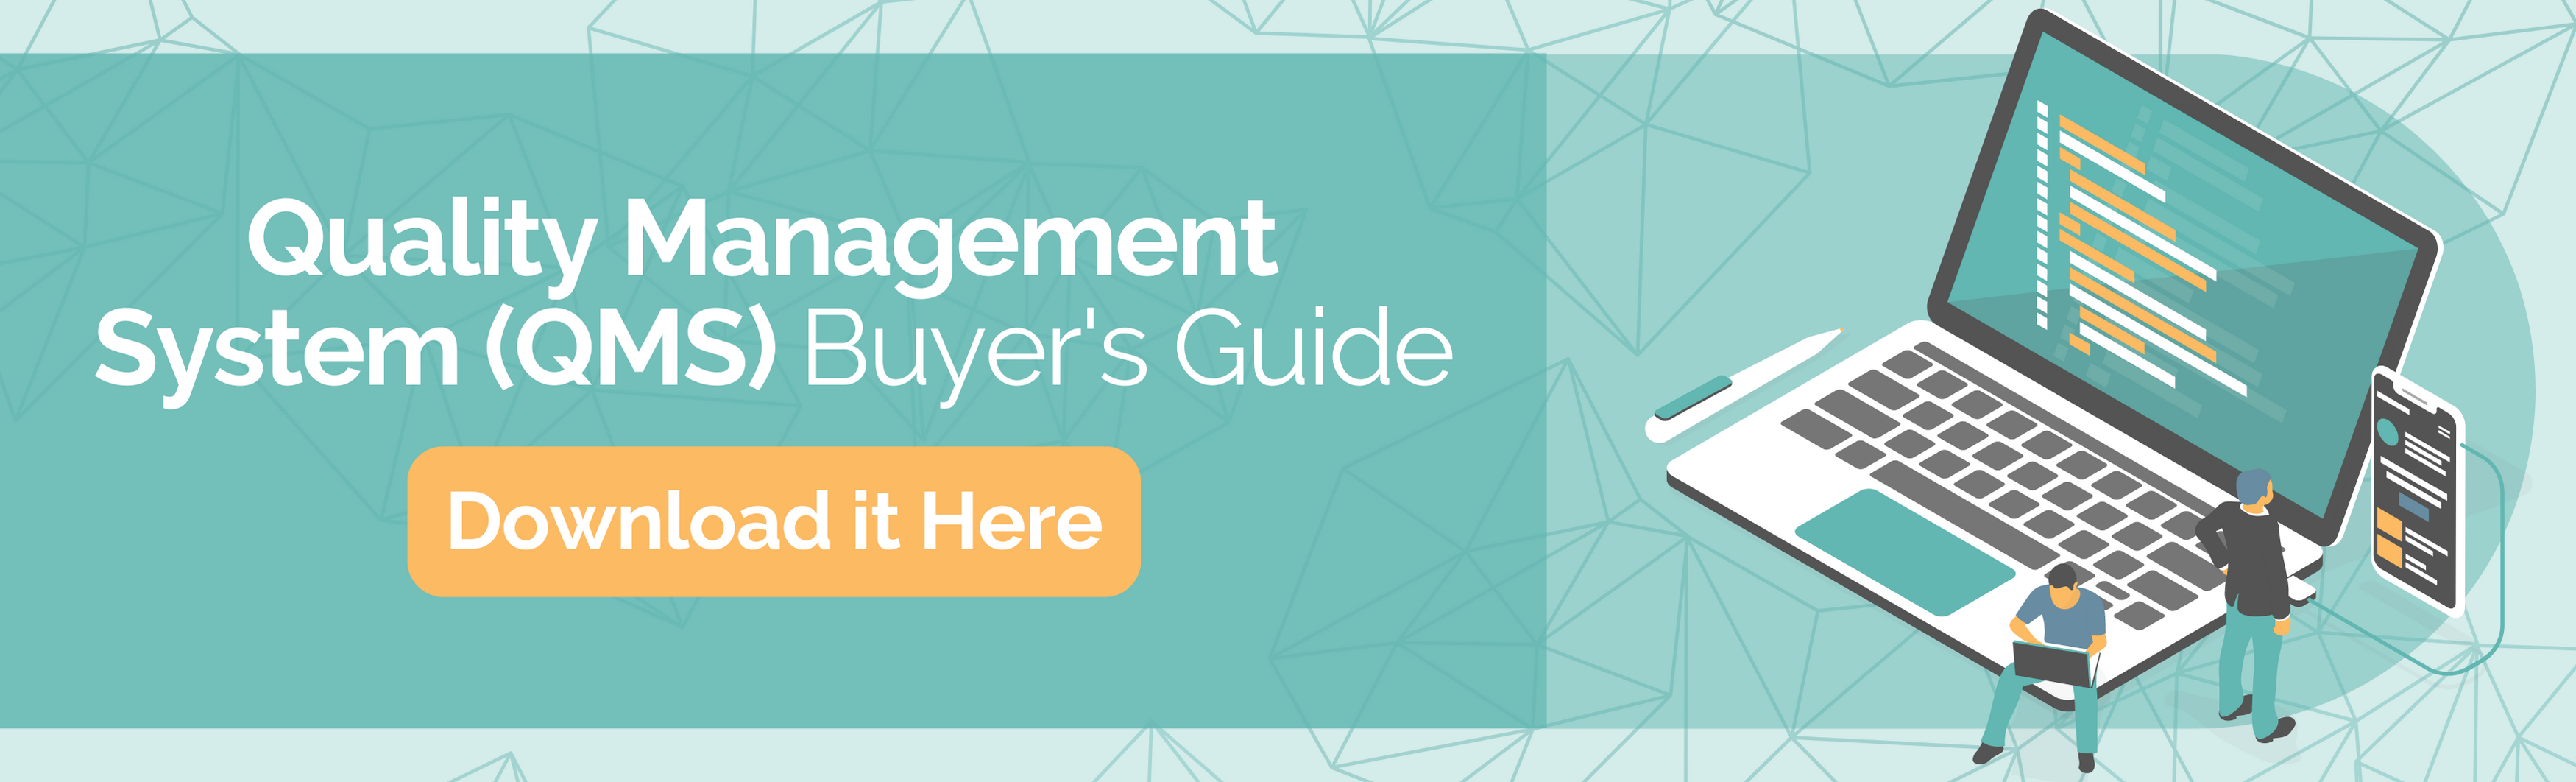 Quality Management System Buyer's Guide